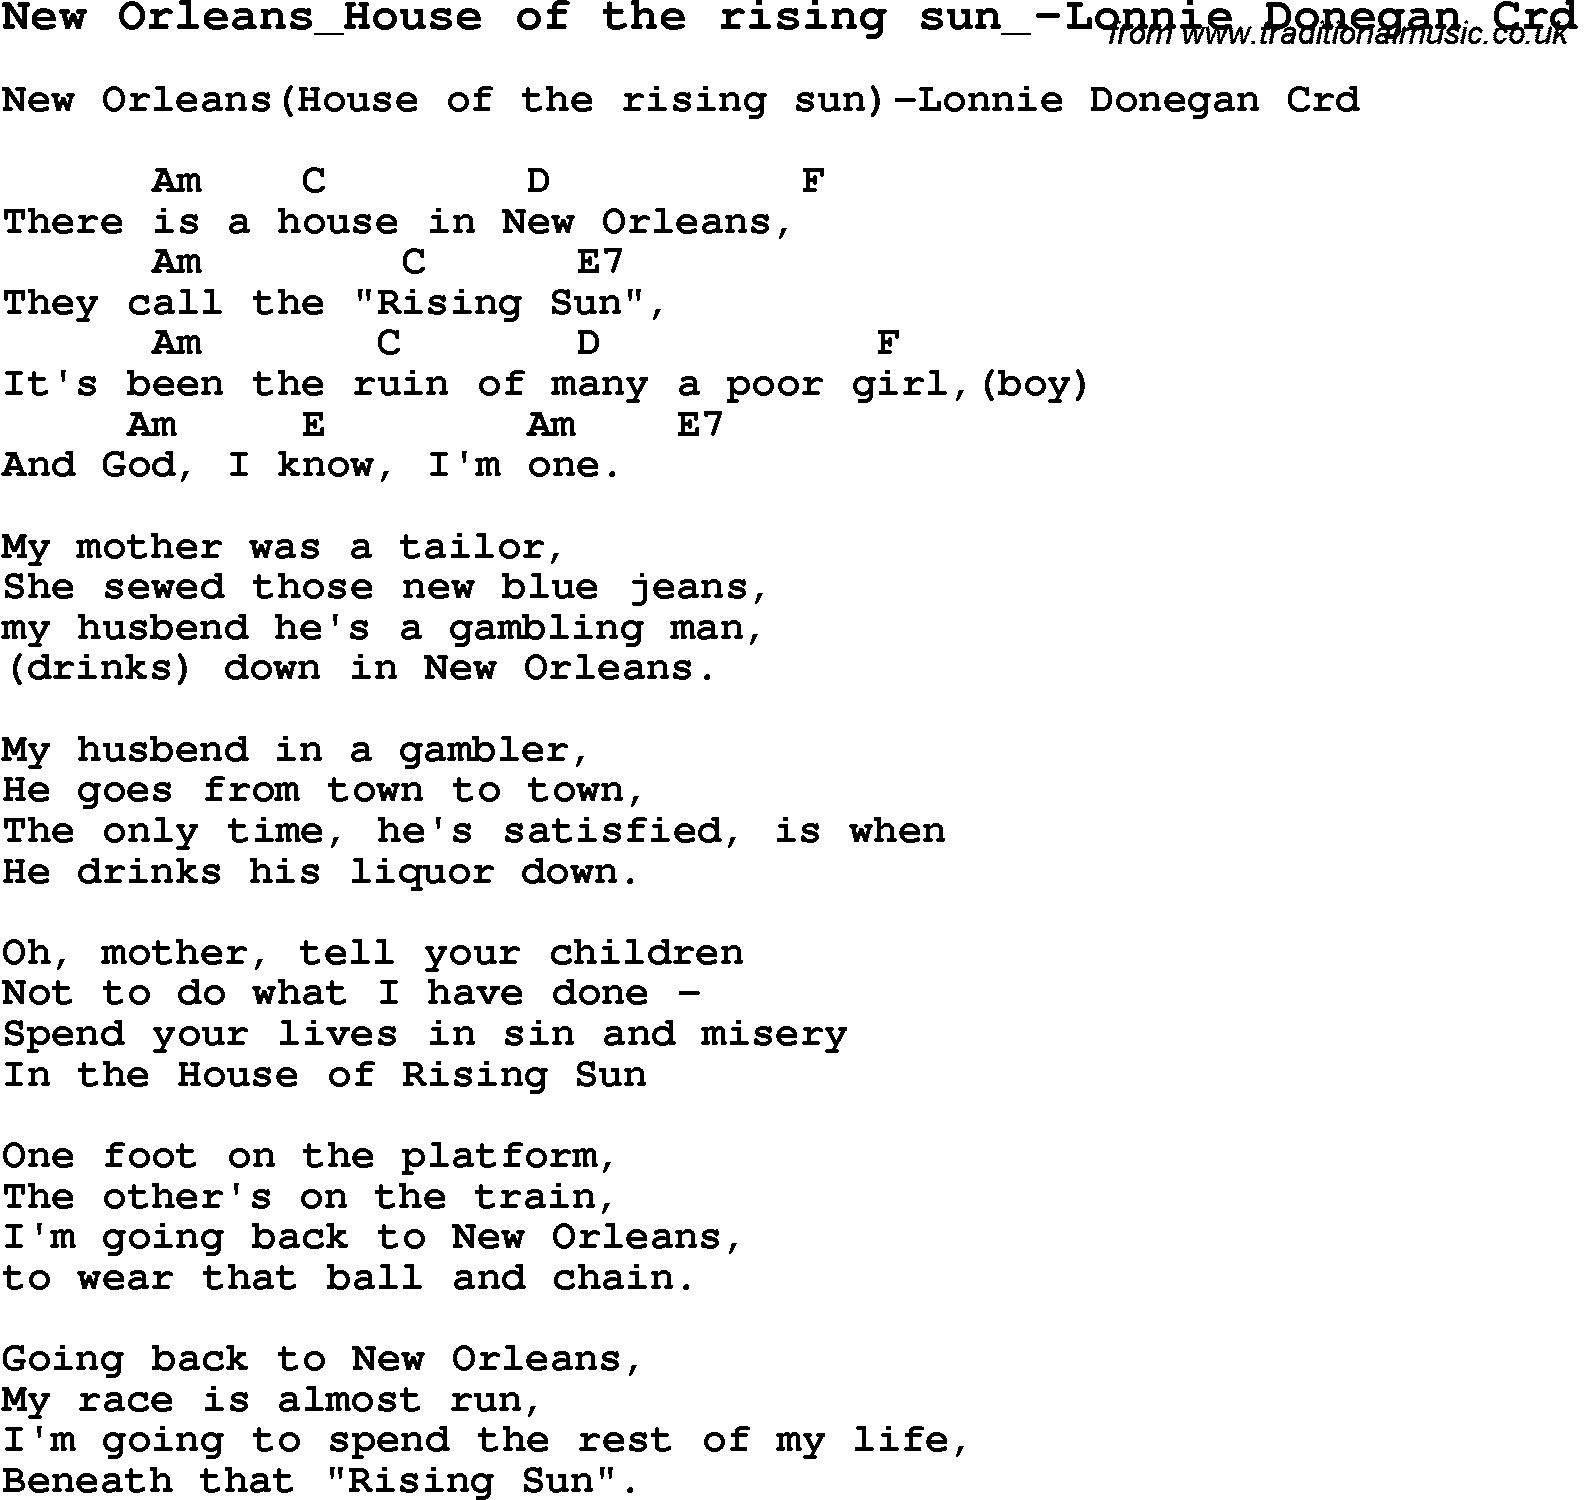 Skiffle Lyrics For New Orleans House Of The Rising Sun Lonnie Donegan With Chords For Mandolin Ukulele Guitar Banjo Etc,Kitchen Countertop Paint Kits Lowes